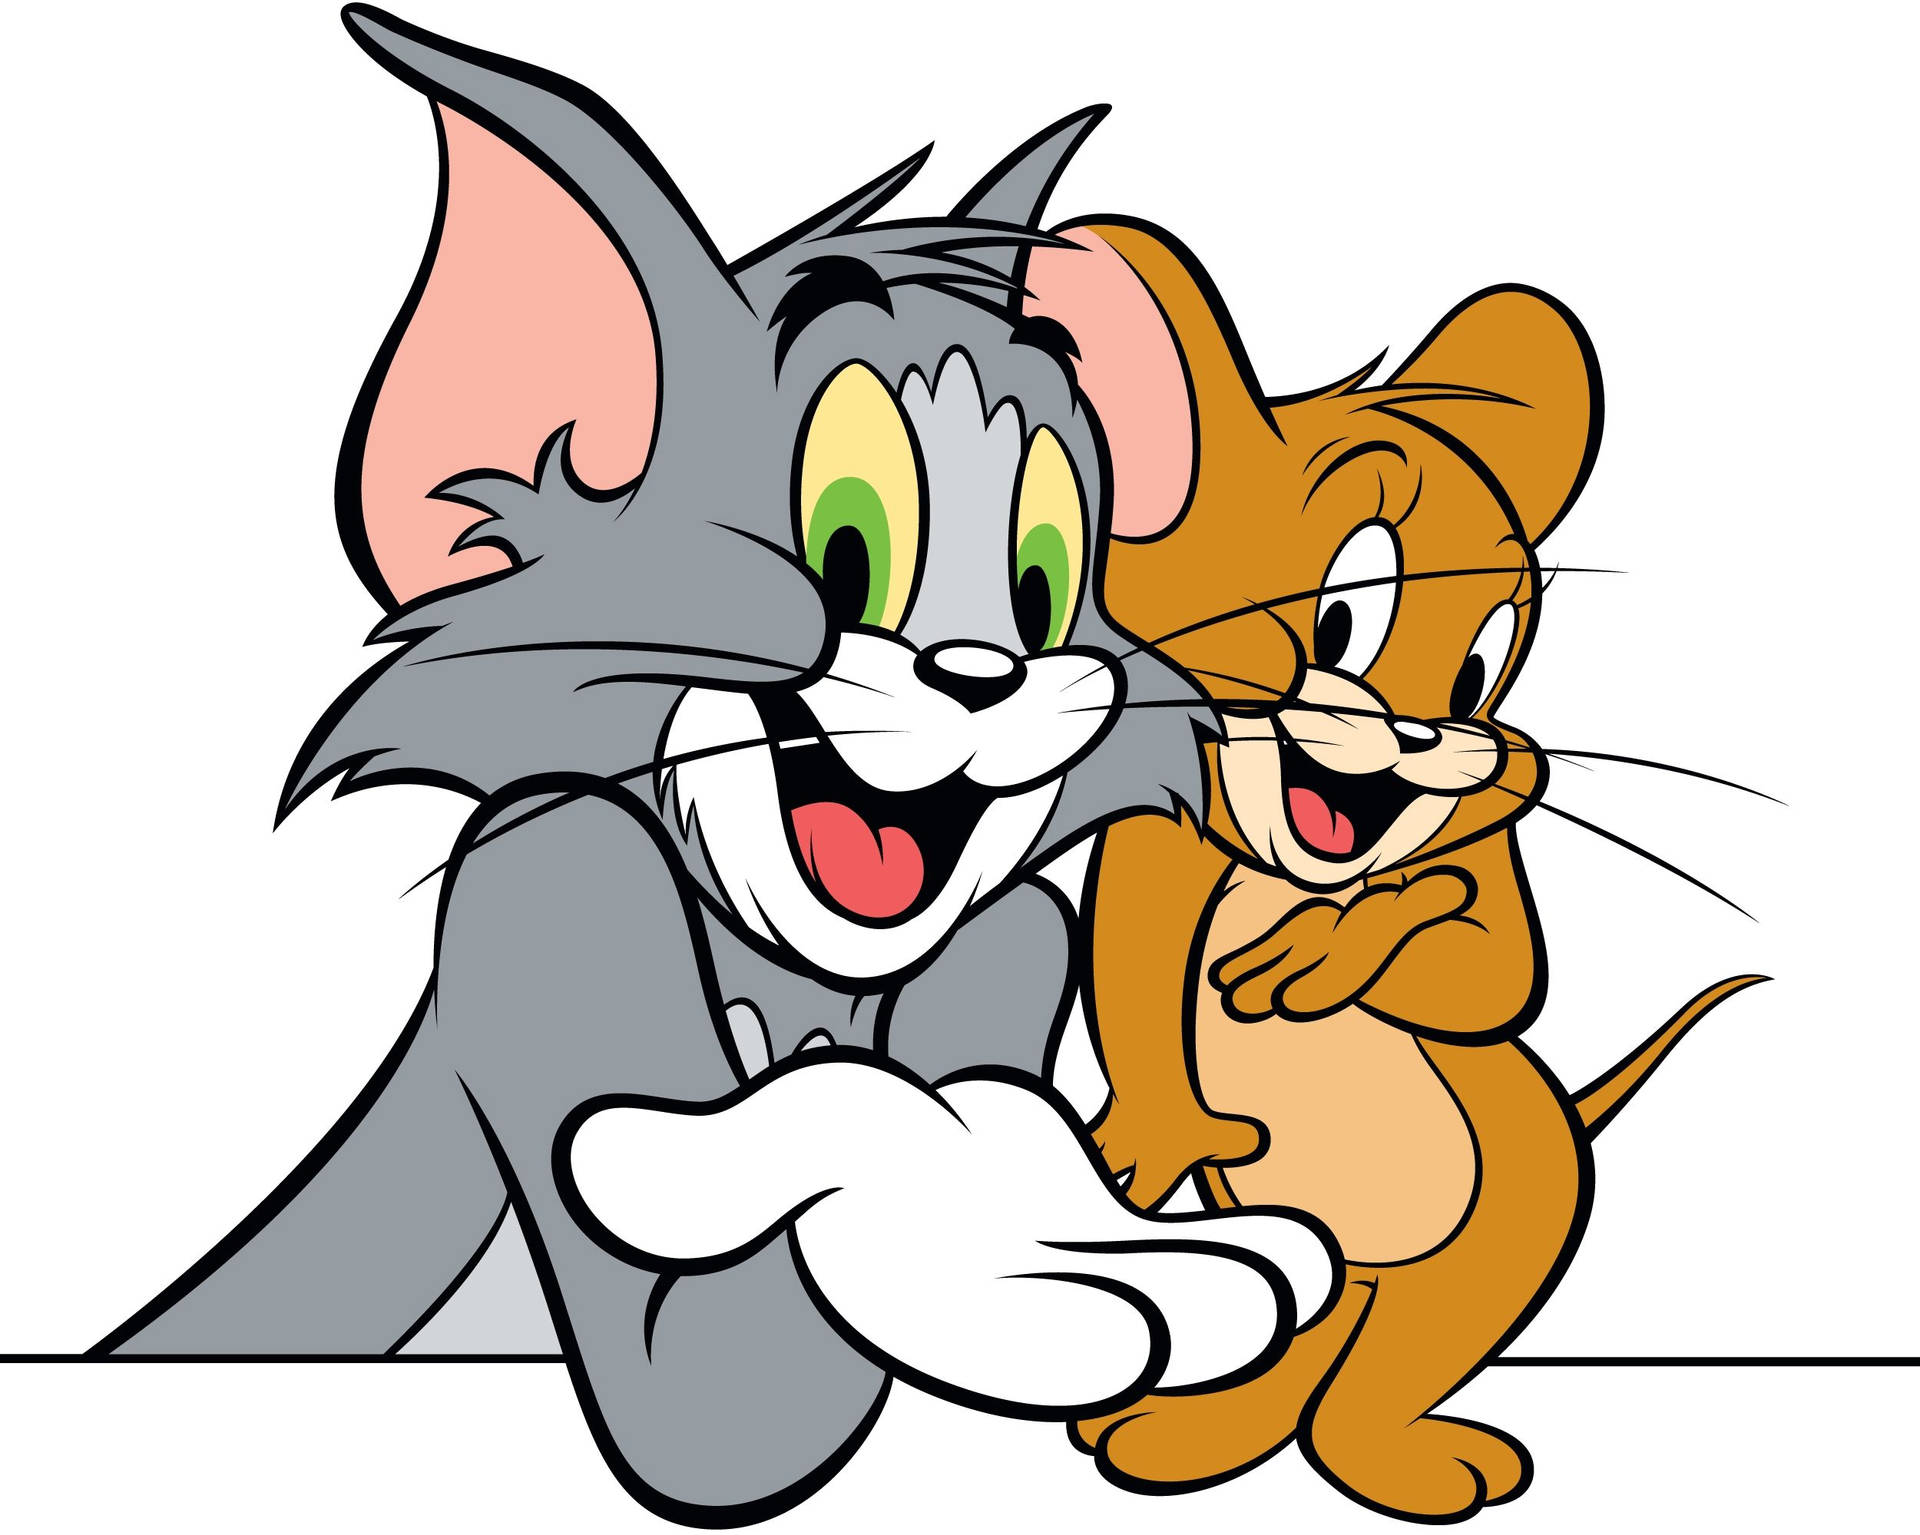 Tom and Jerry wallpaper in 2022  Cute cartoon wallpapers Tom and jerry  wallpapers Looney tunes   Tom and jerry wallpapers Tom and jerry  cartoon Tom and jerry